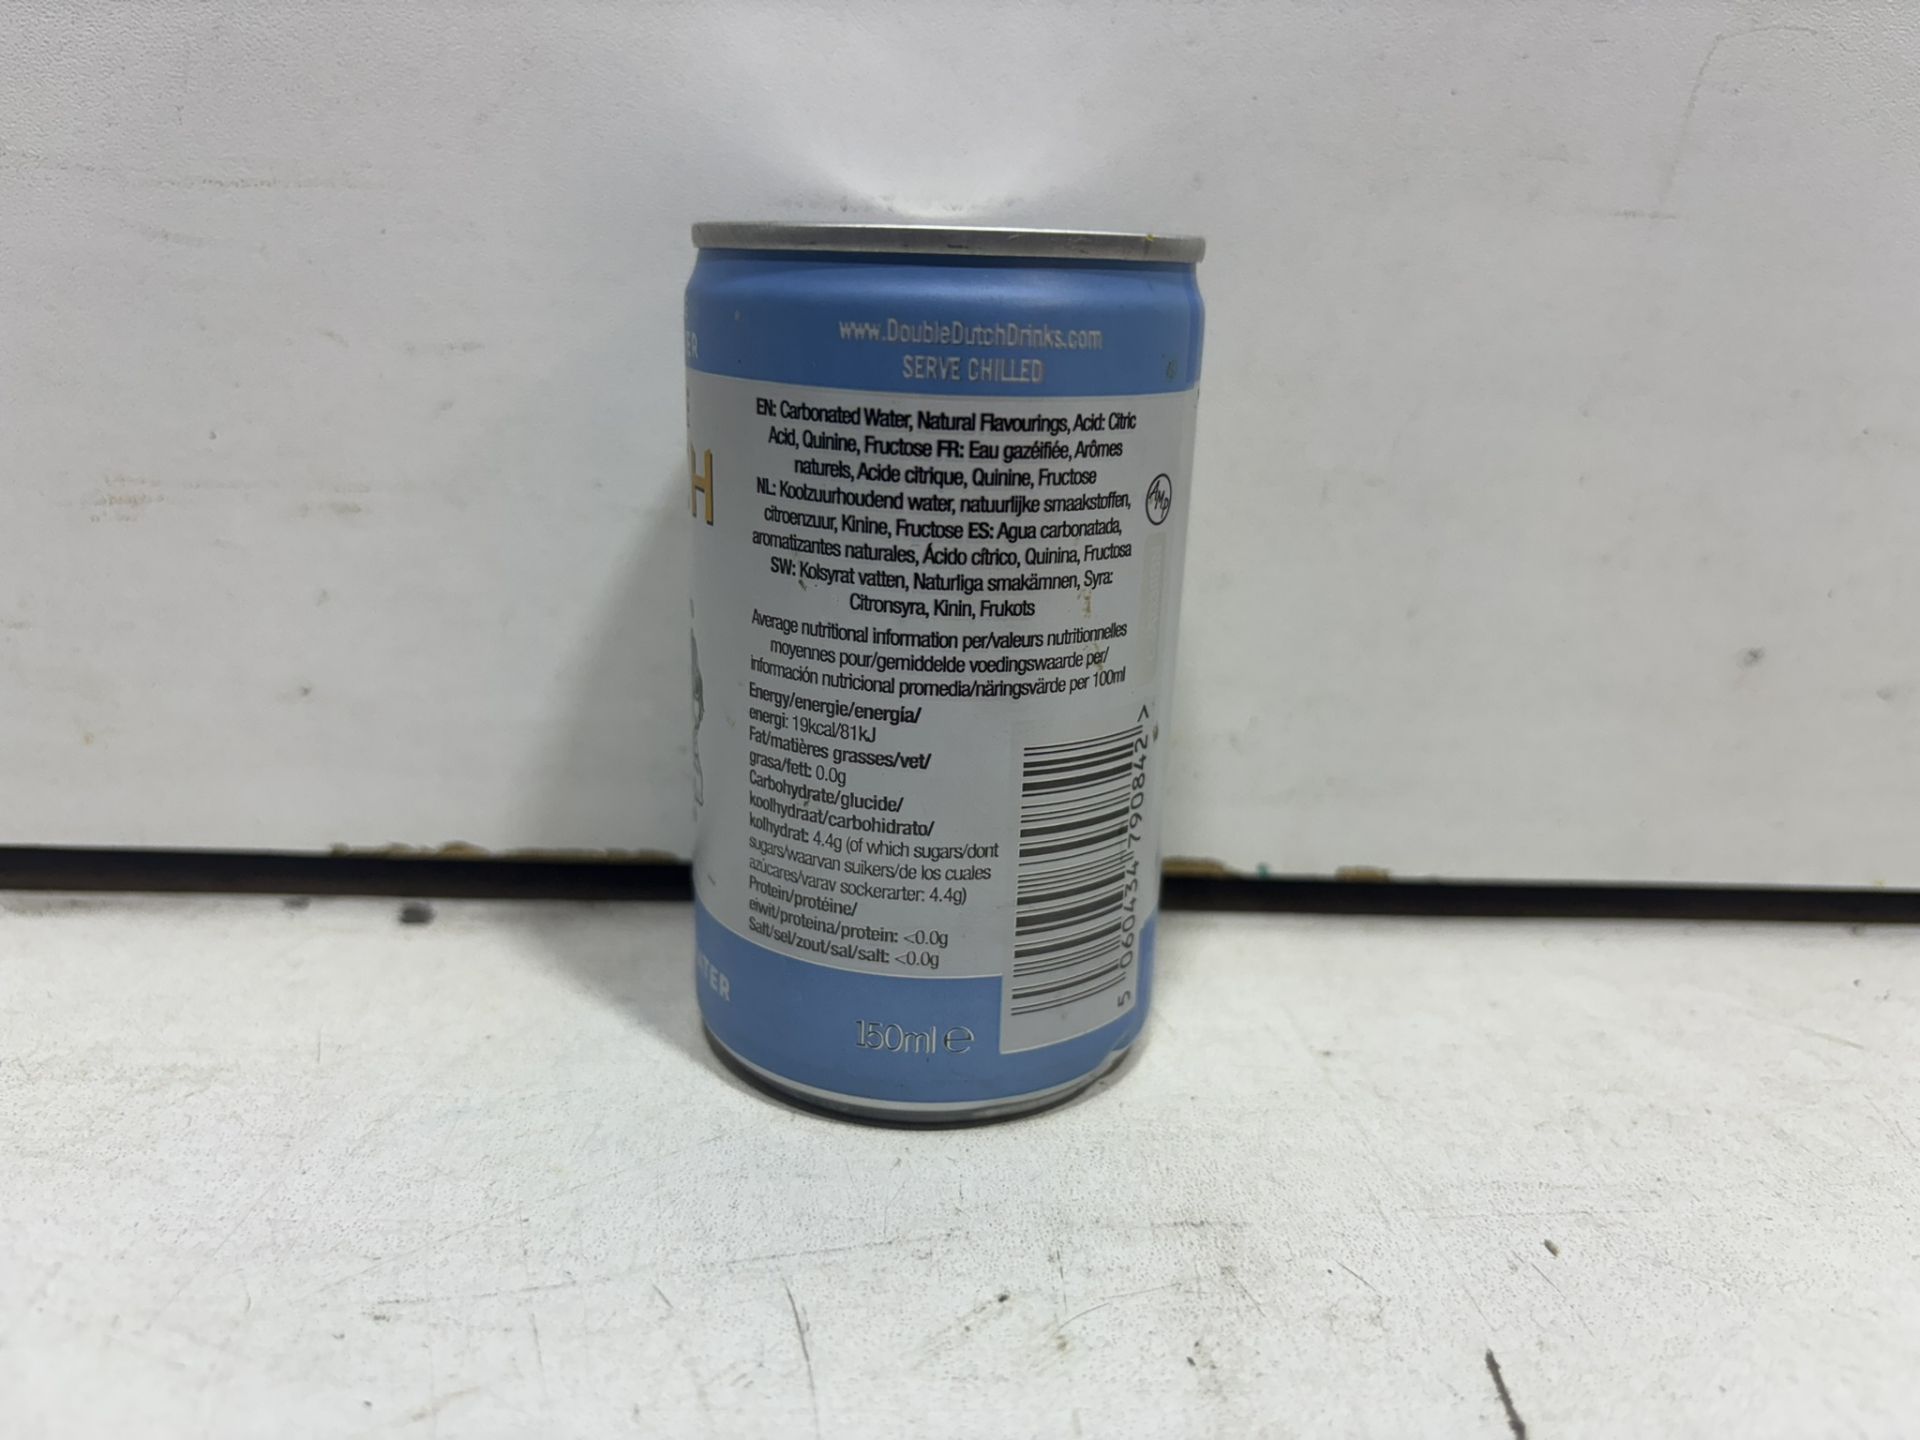 10 X Cans Of Double Dutch Skinny Tonic Water 150Ml - Image 2 of 3